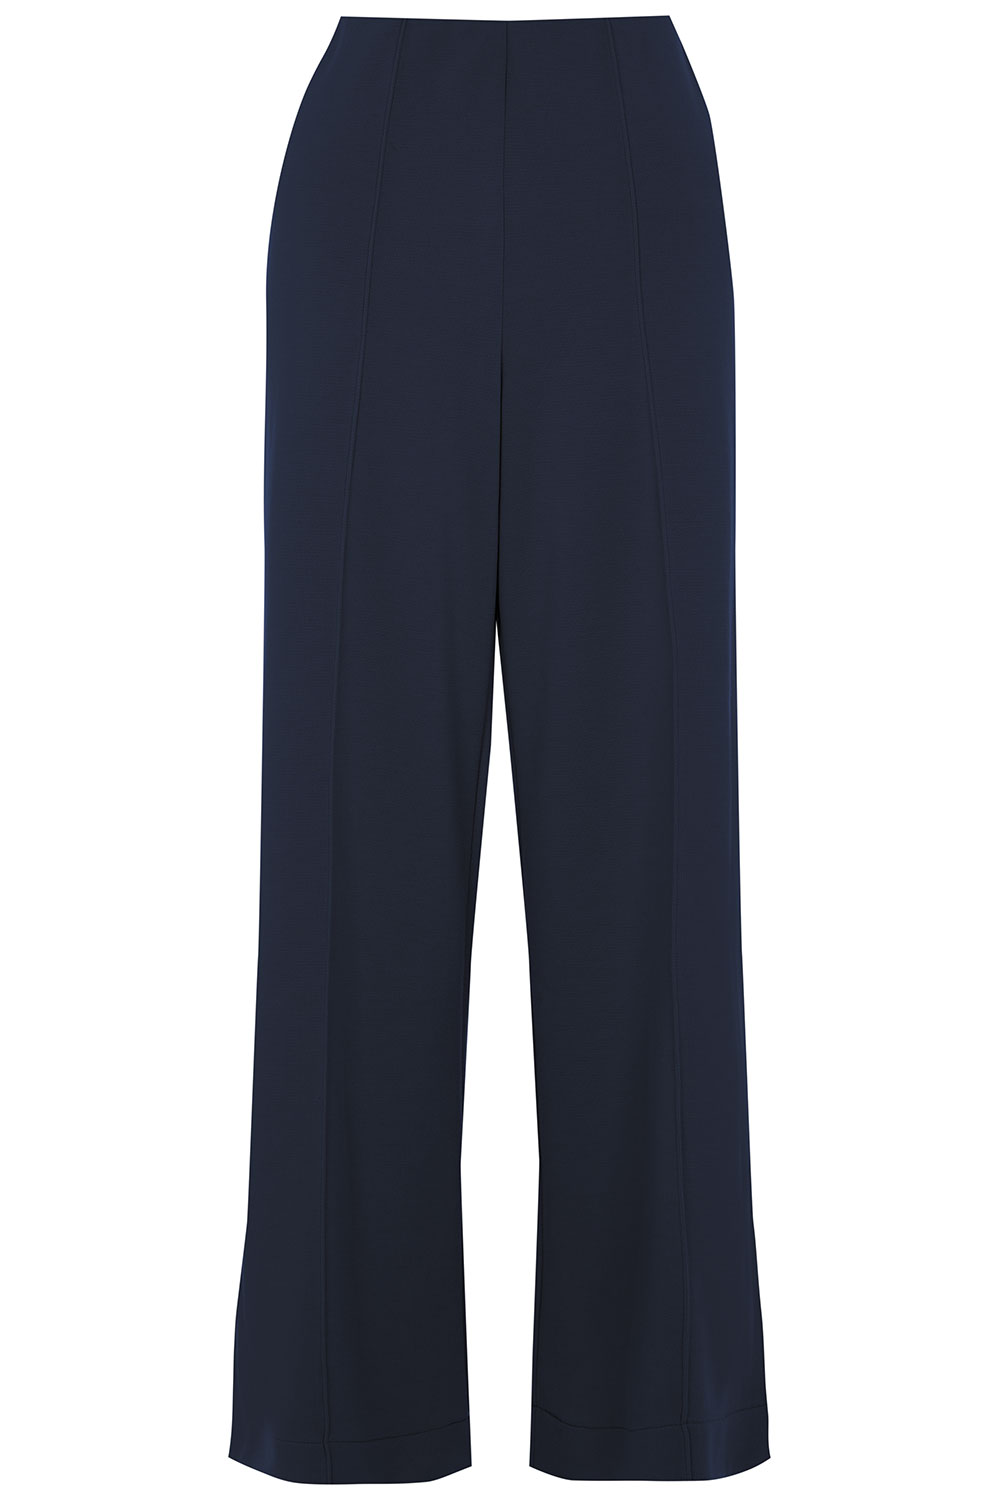 Pleated Front Textured Wide Leg Elasticated Trousers | Bonmarché